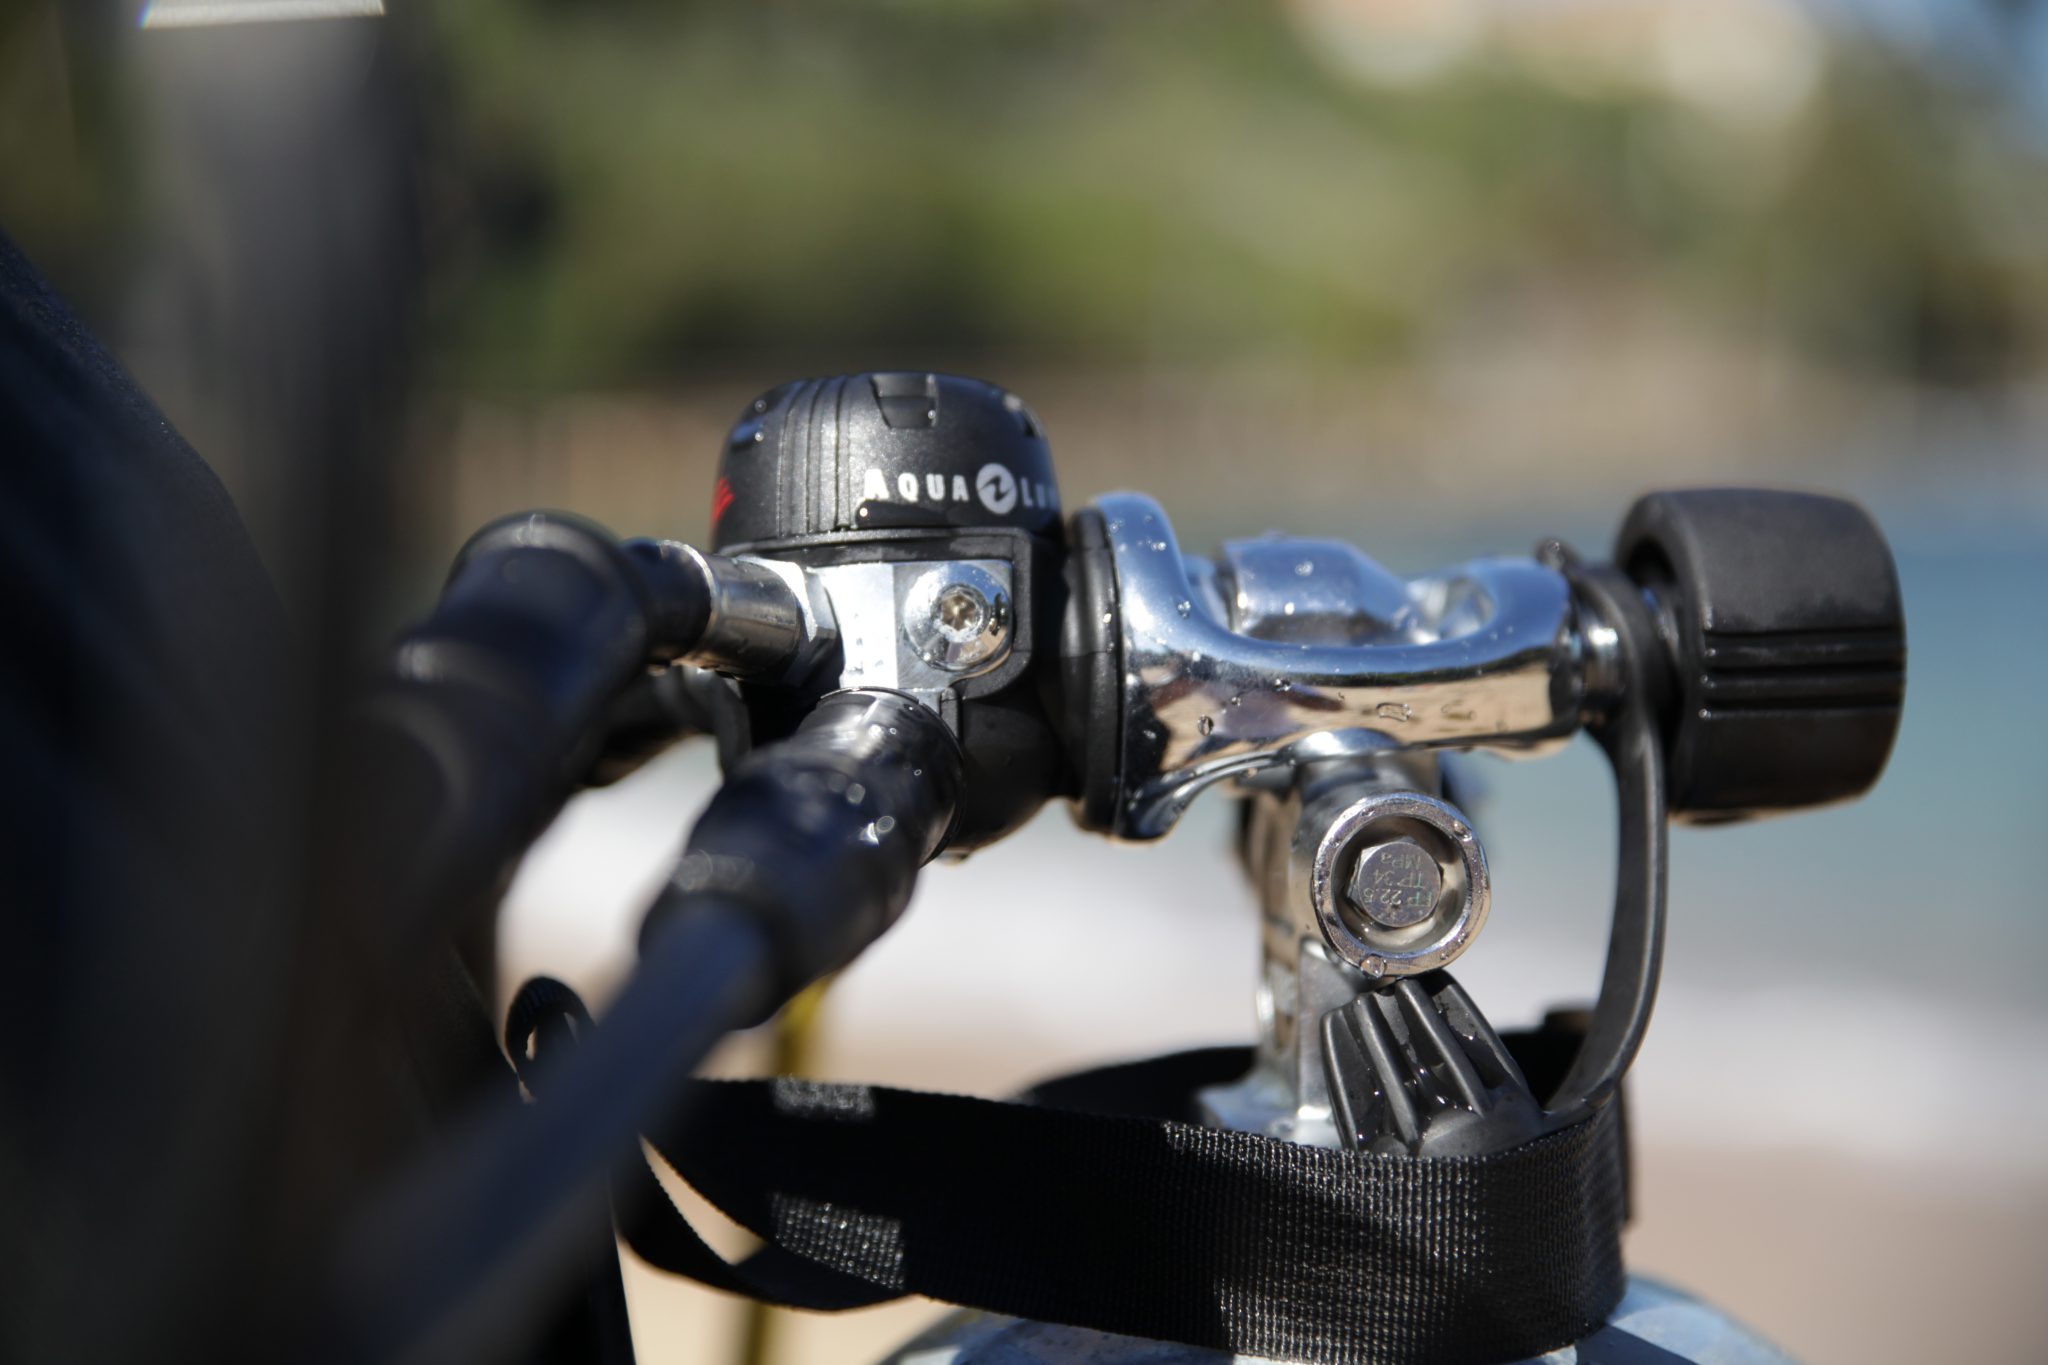 A scuba regulator first stage, which connects second stages to the cylinder and is part of every scuba gear beginner set